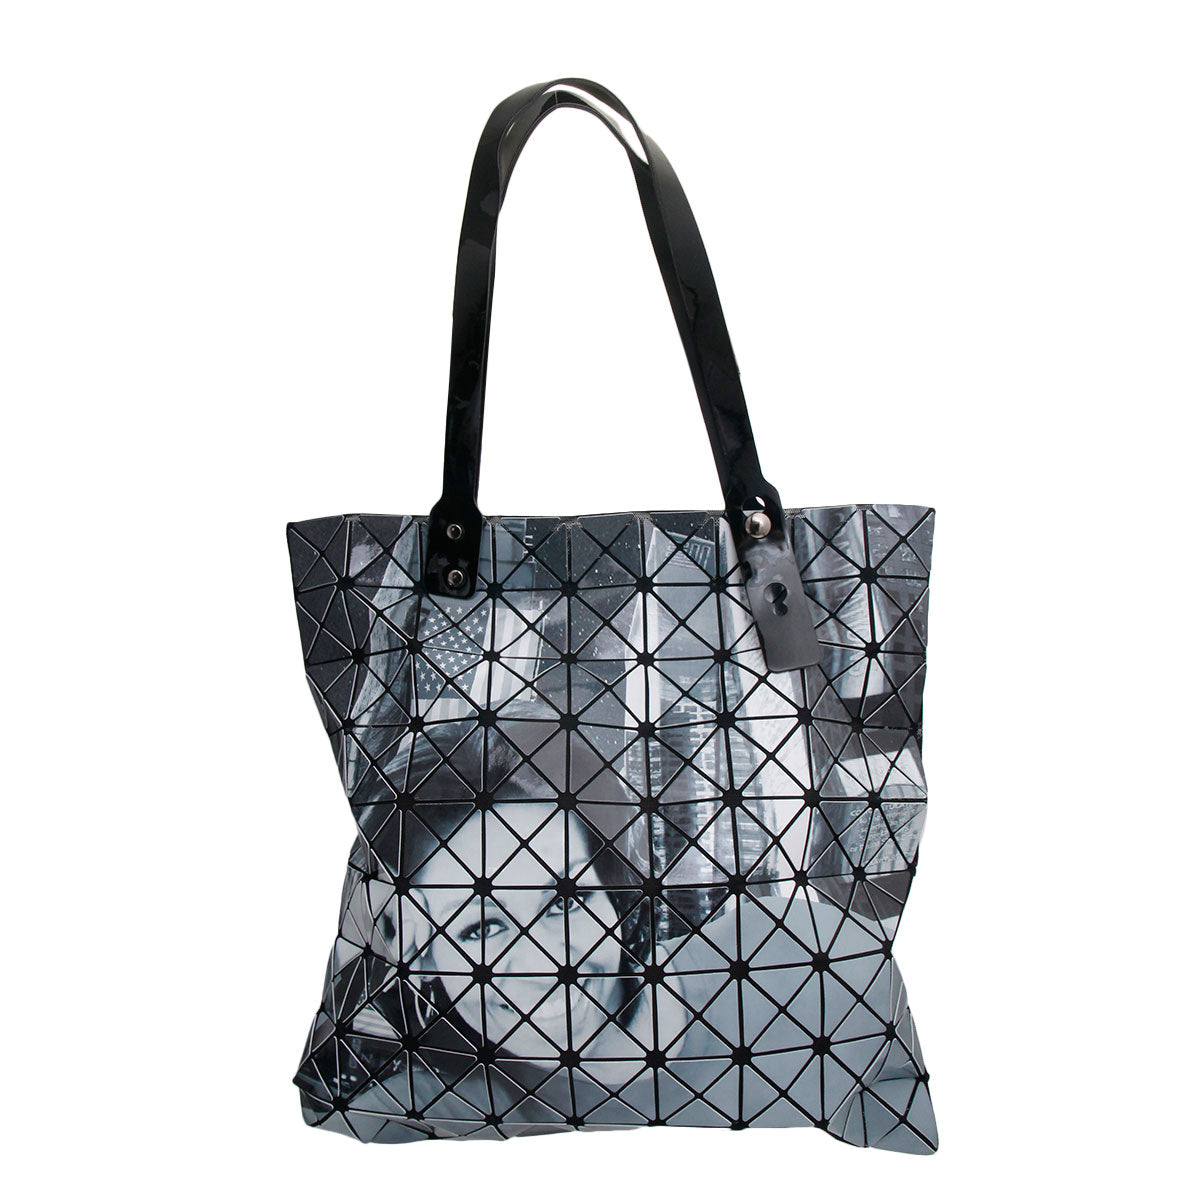 First Lady Obama Black and White Prism Tote